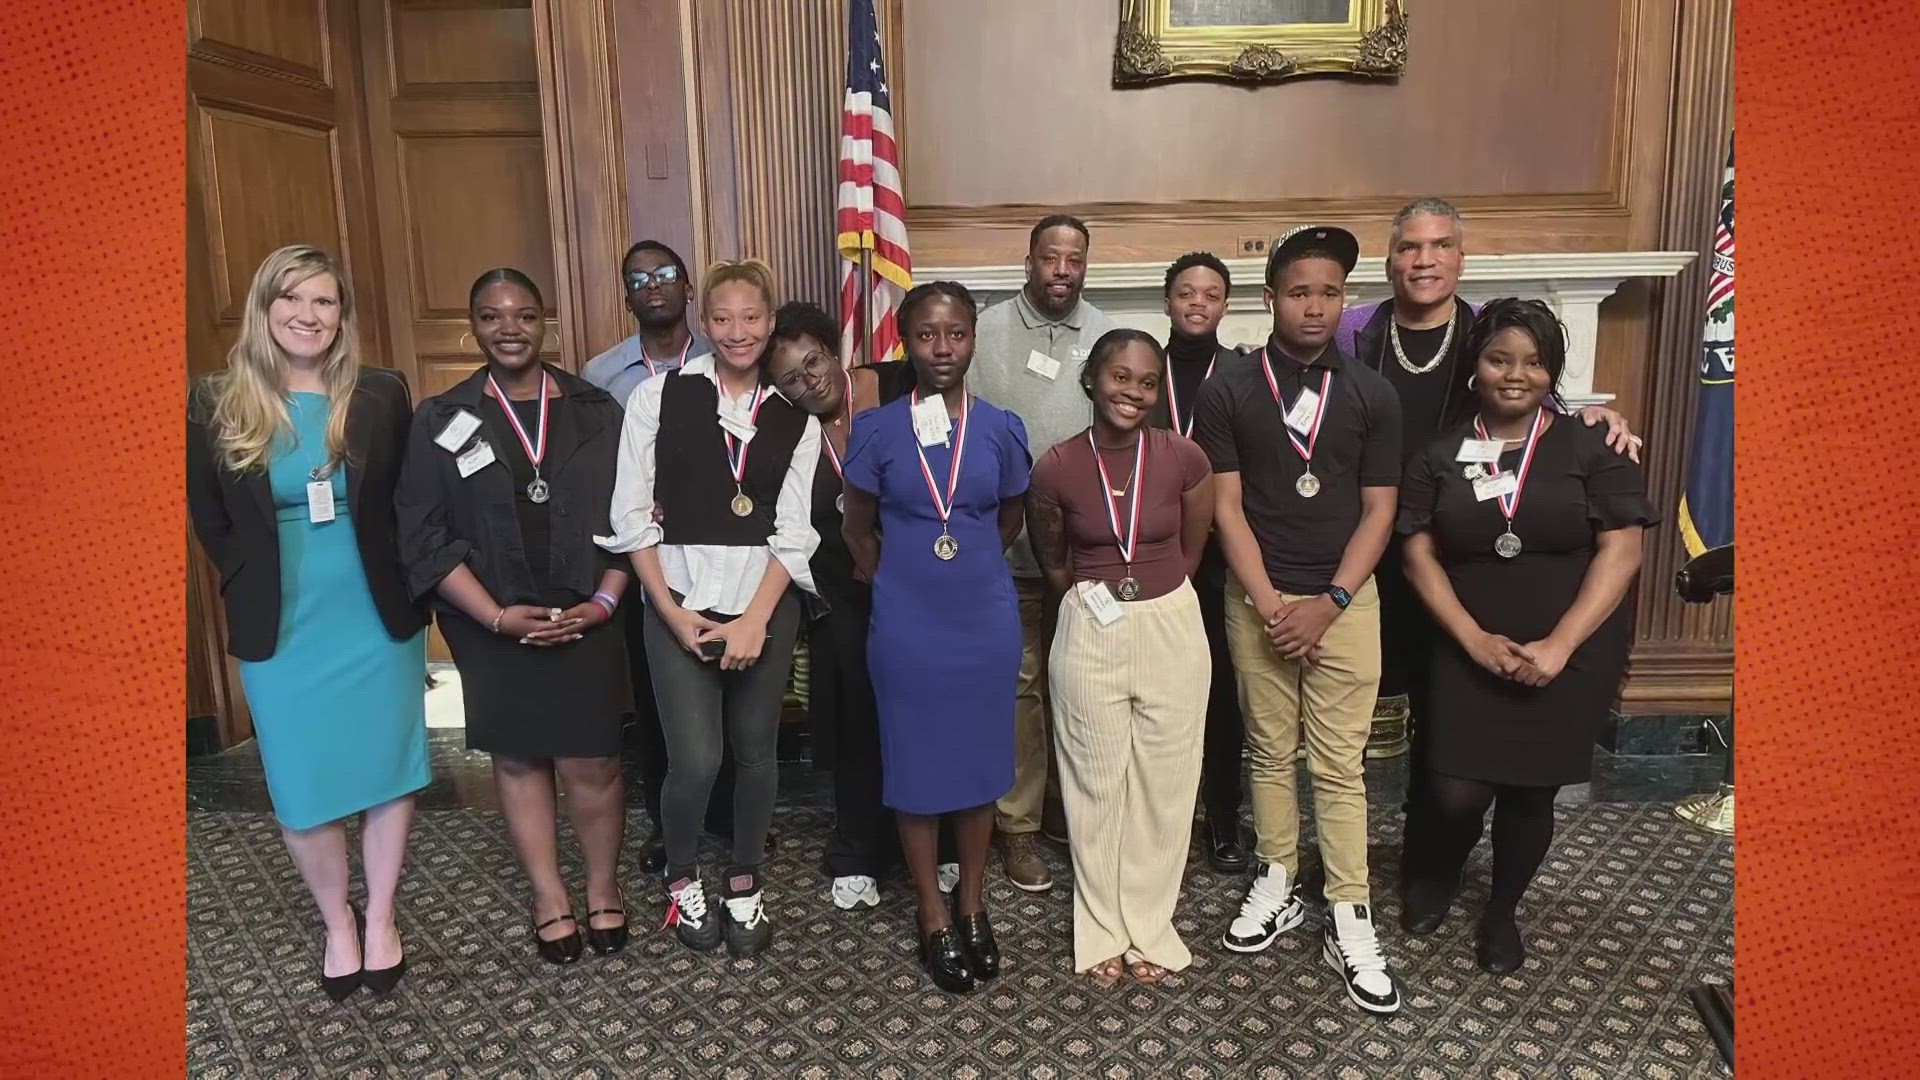 On Wednesday there was a very special congressional recognition for some of the District's brightest young people, and that is getting us uplifted.